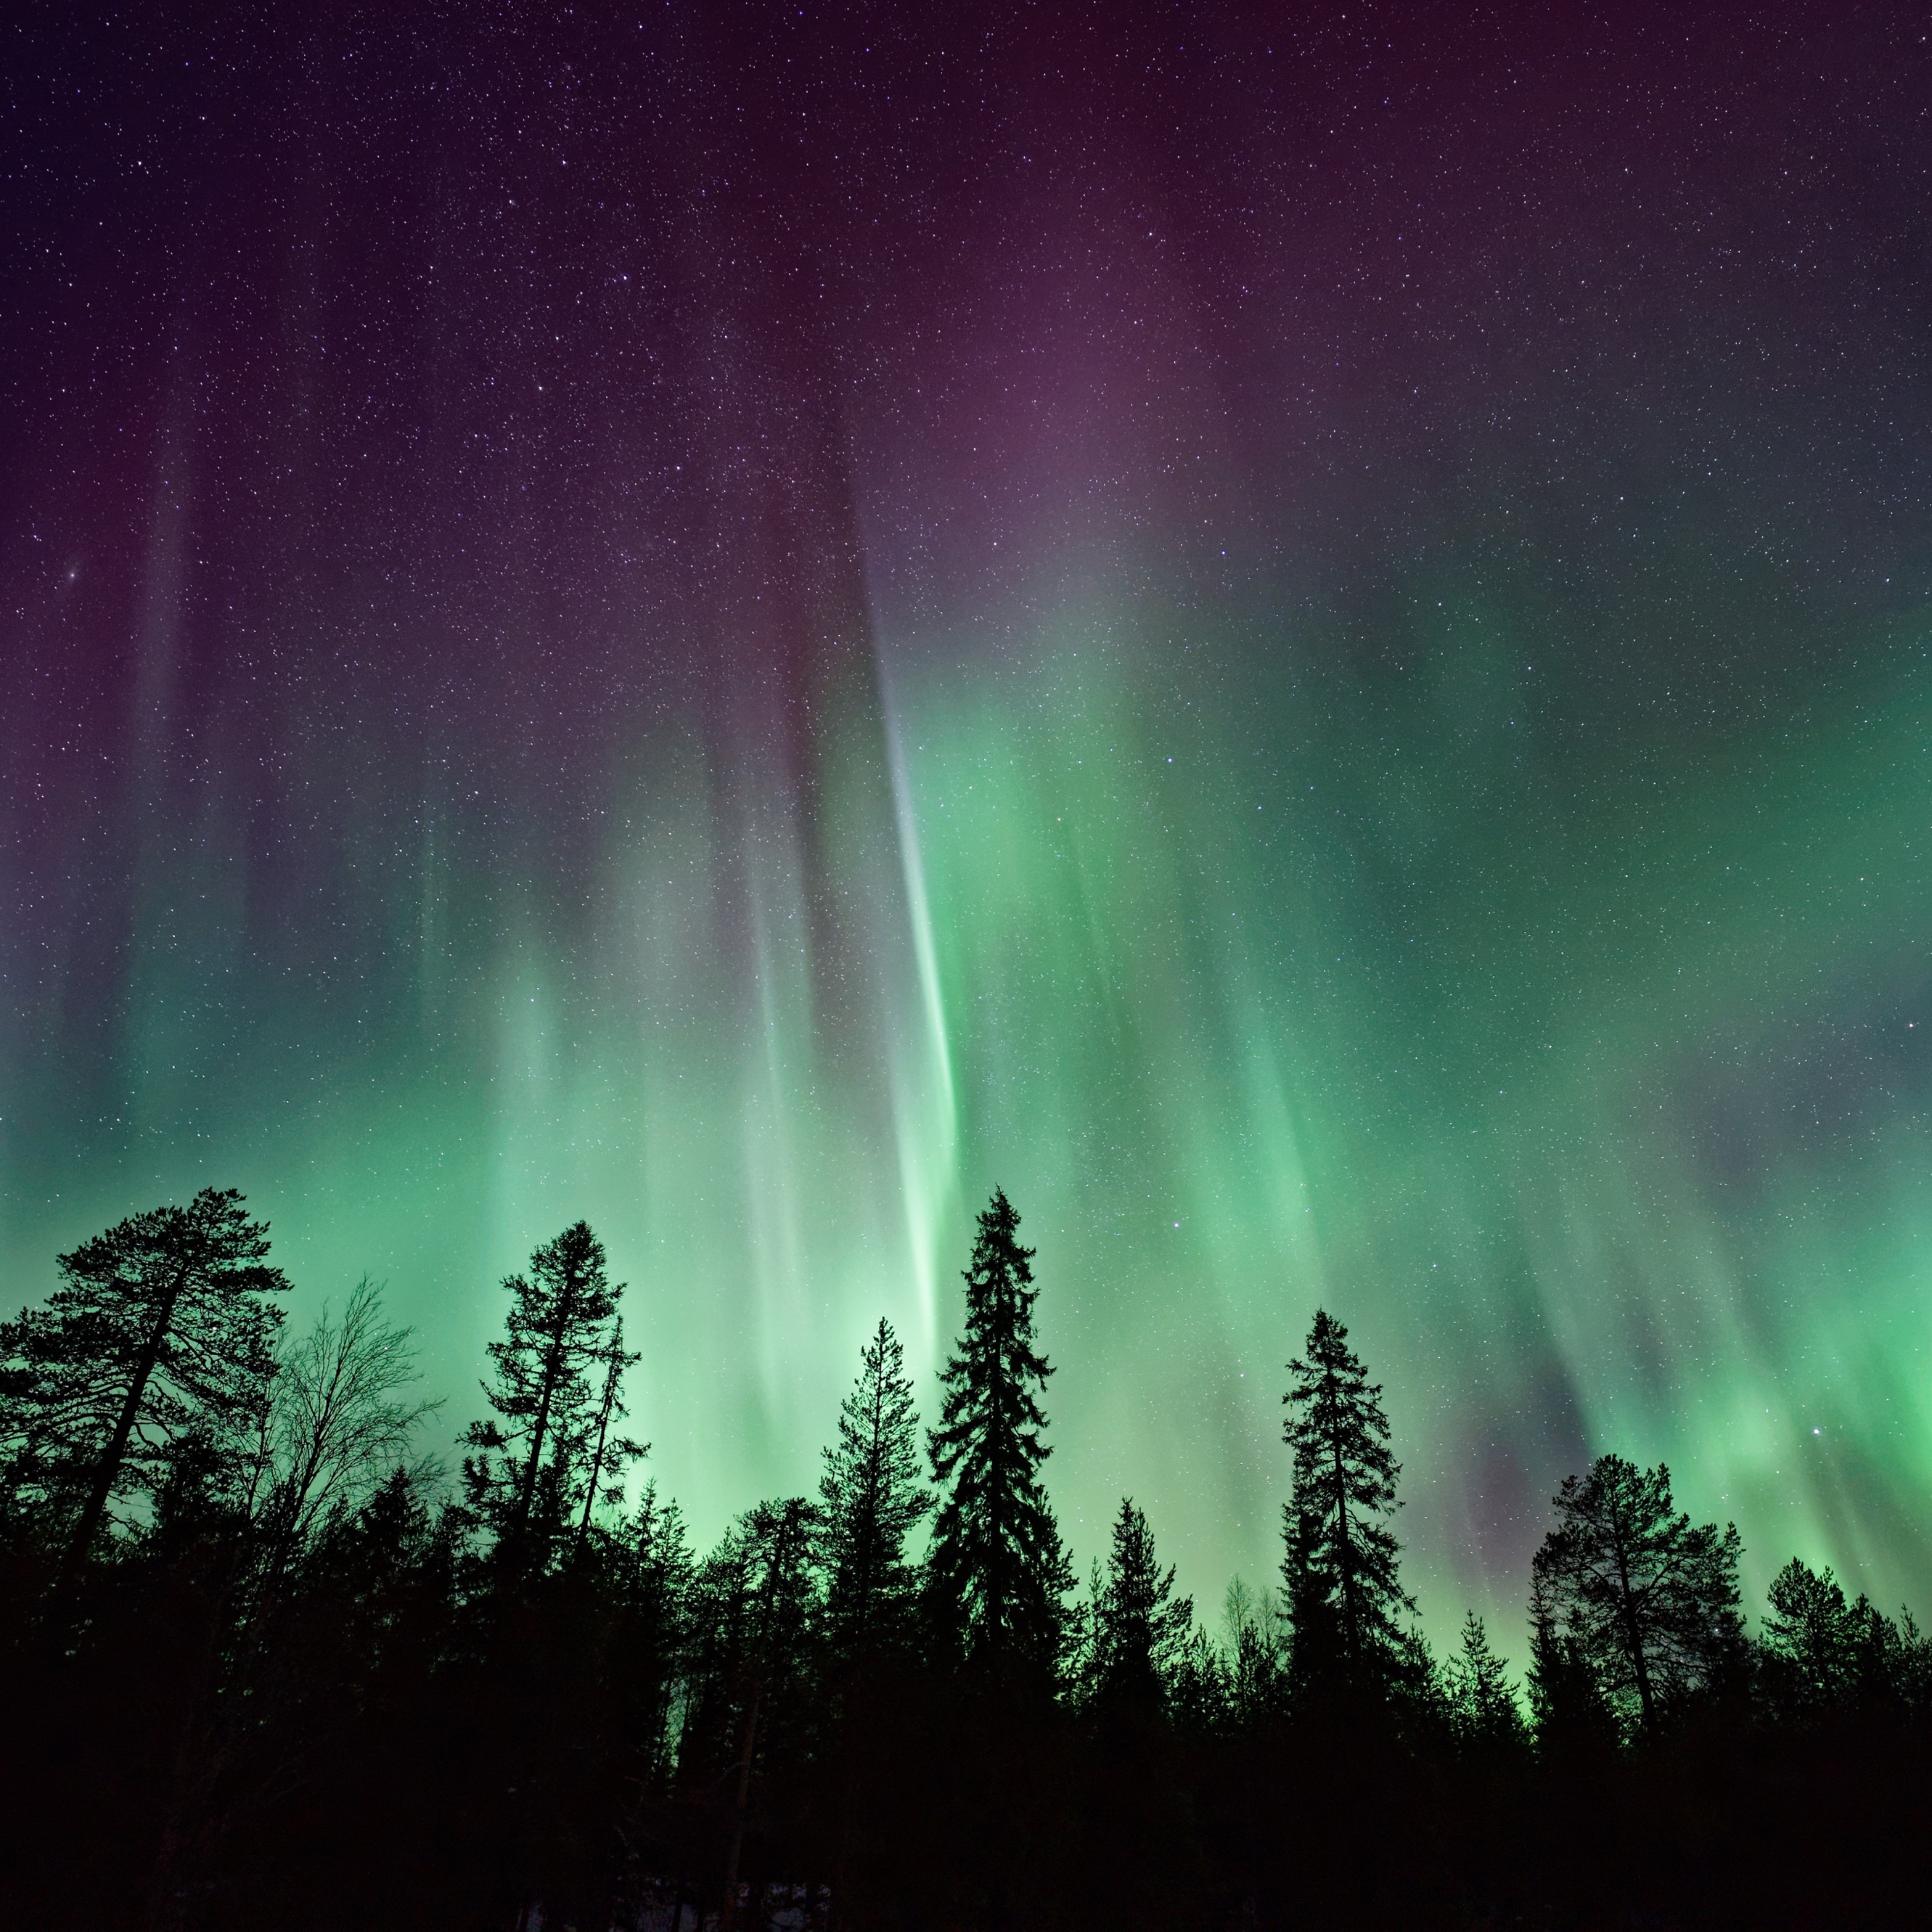 Wallpaper Weekends: Northern Lights 2 for Mac, iPad, iPhone, and Apple Watch